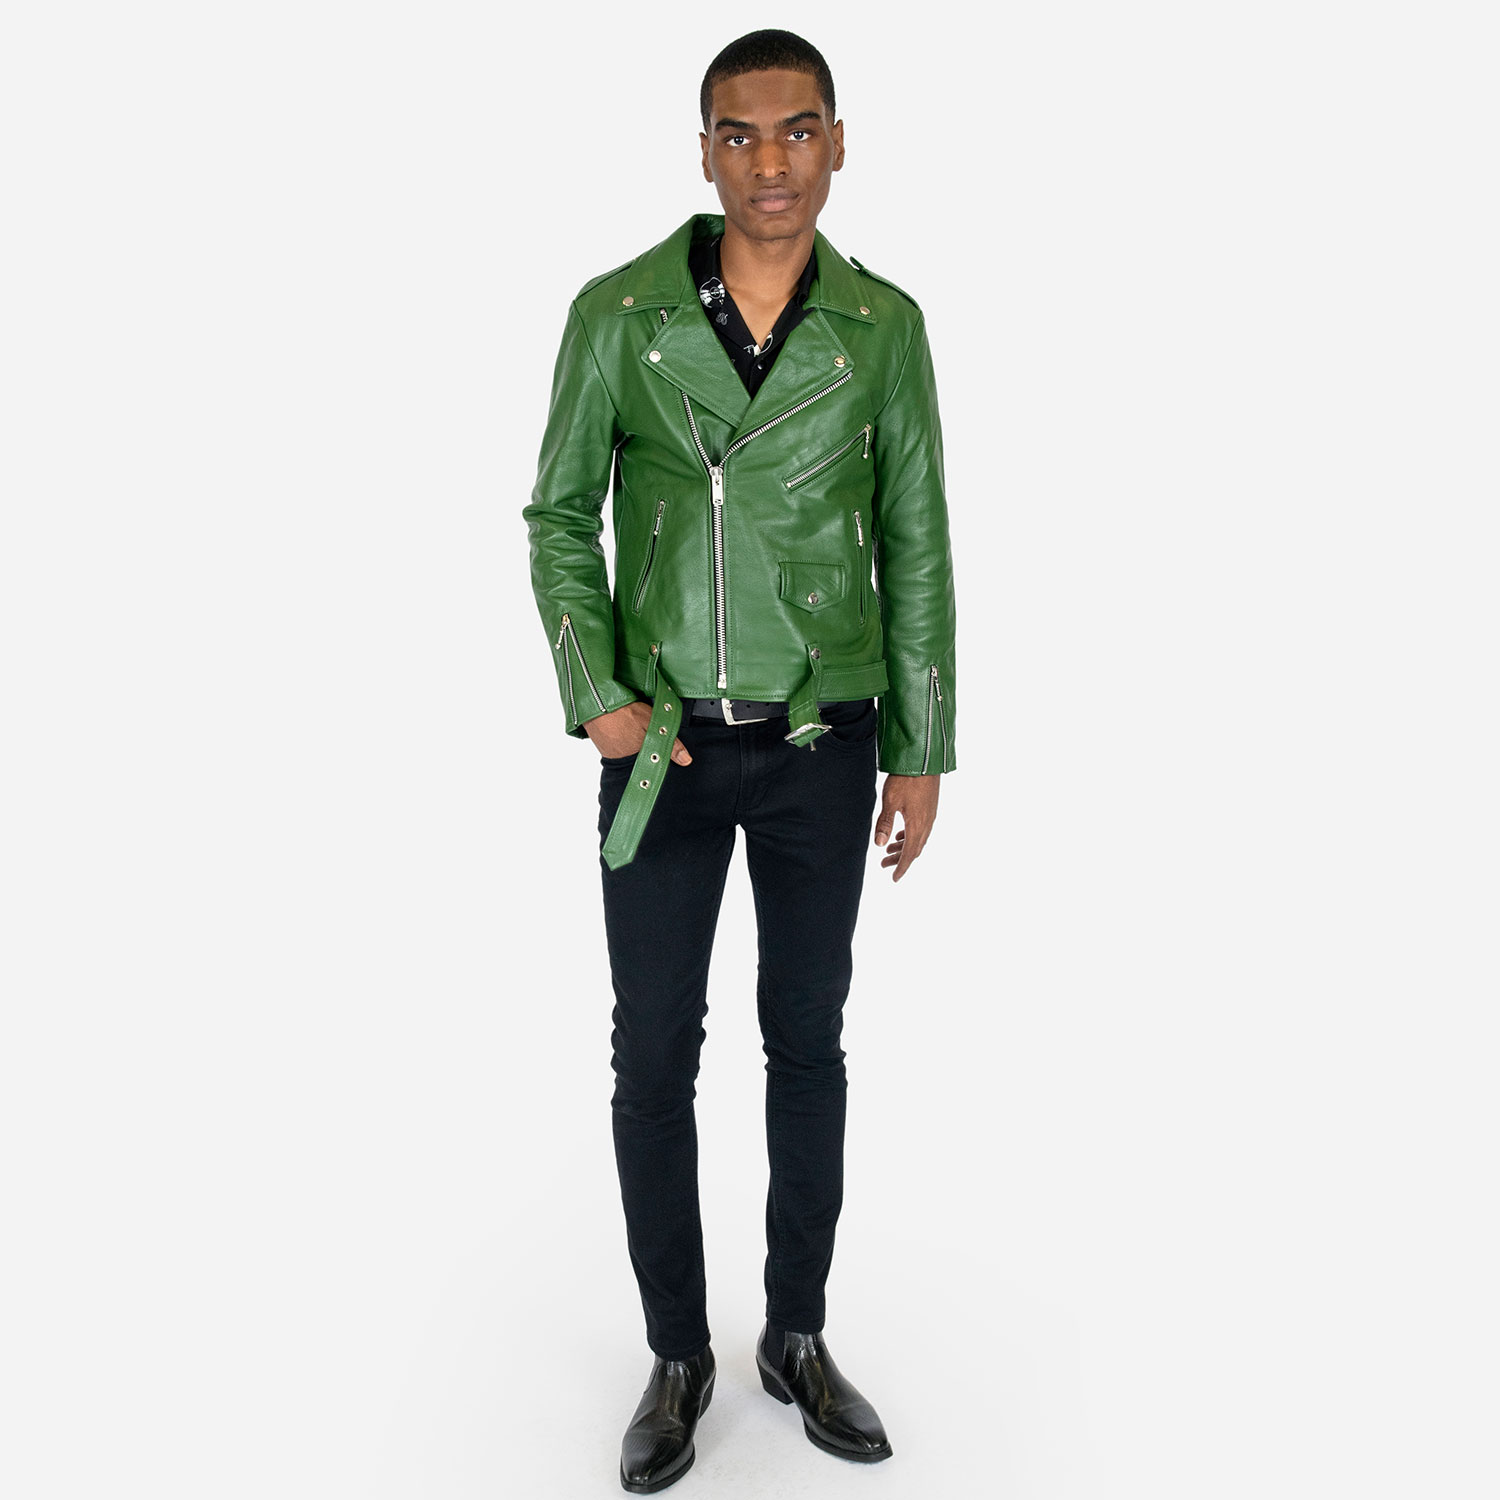 Moffit Distressed Dark Green Leather Jacket Mens - HGH-096